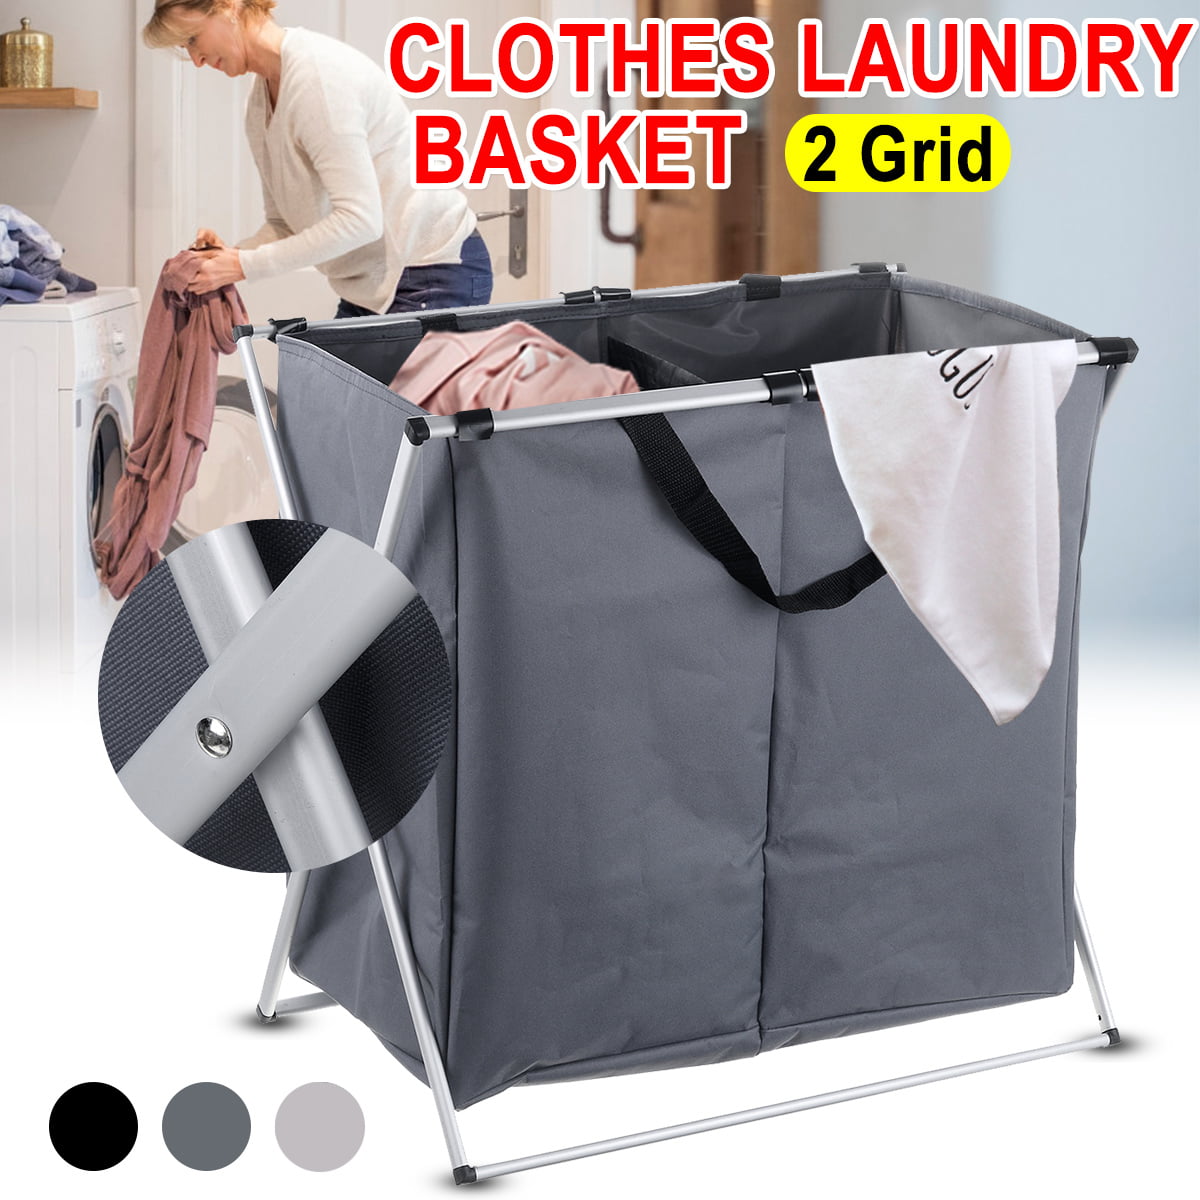 2 Compartment Laundry Basket Oxford Fabric Clothes Hamper Bin Washing Sorter New 